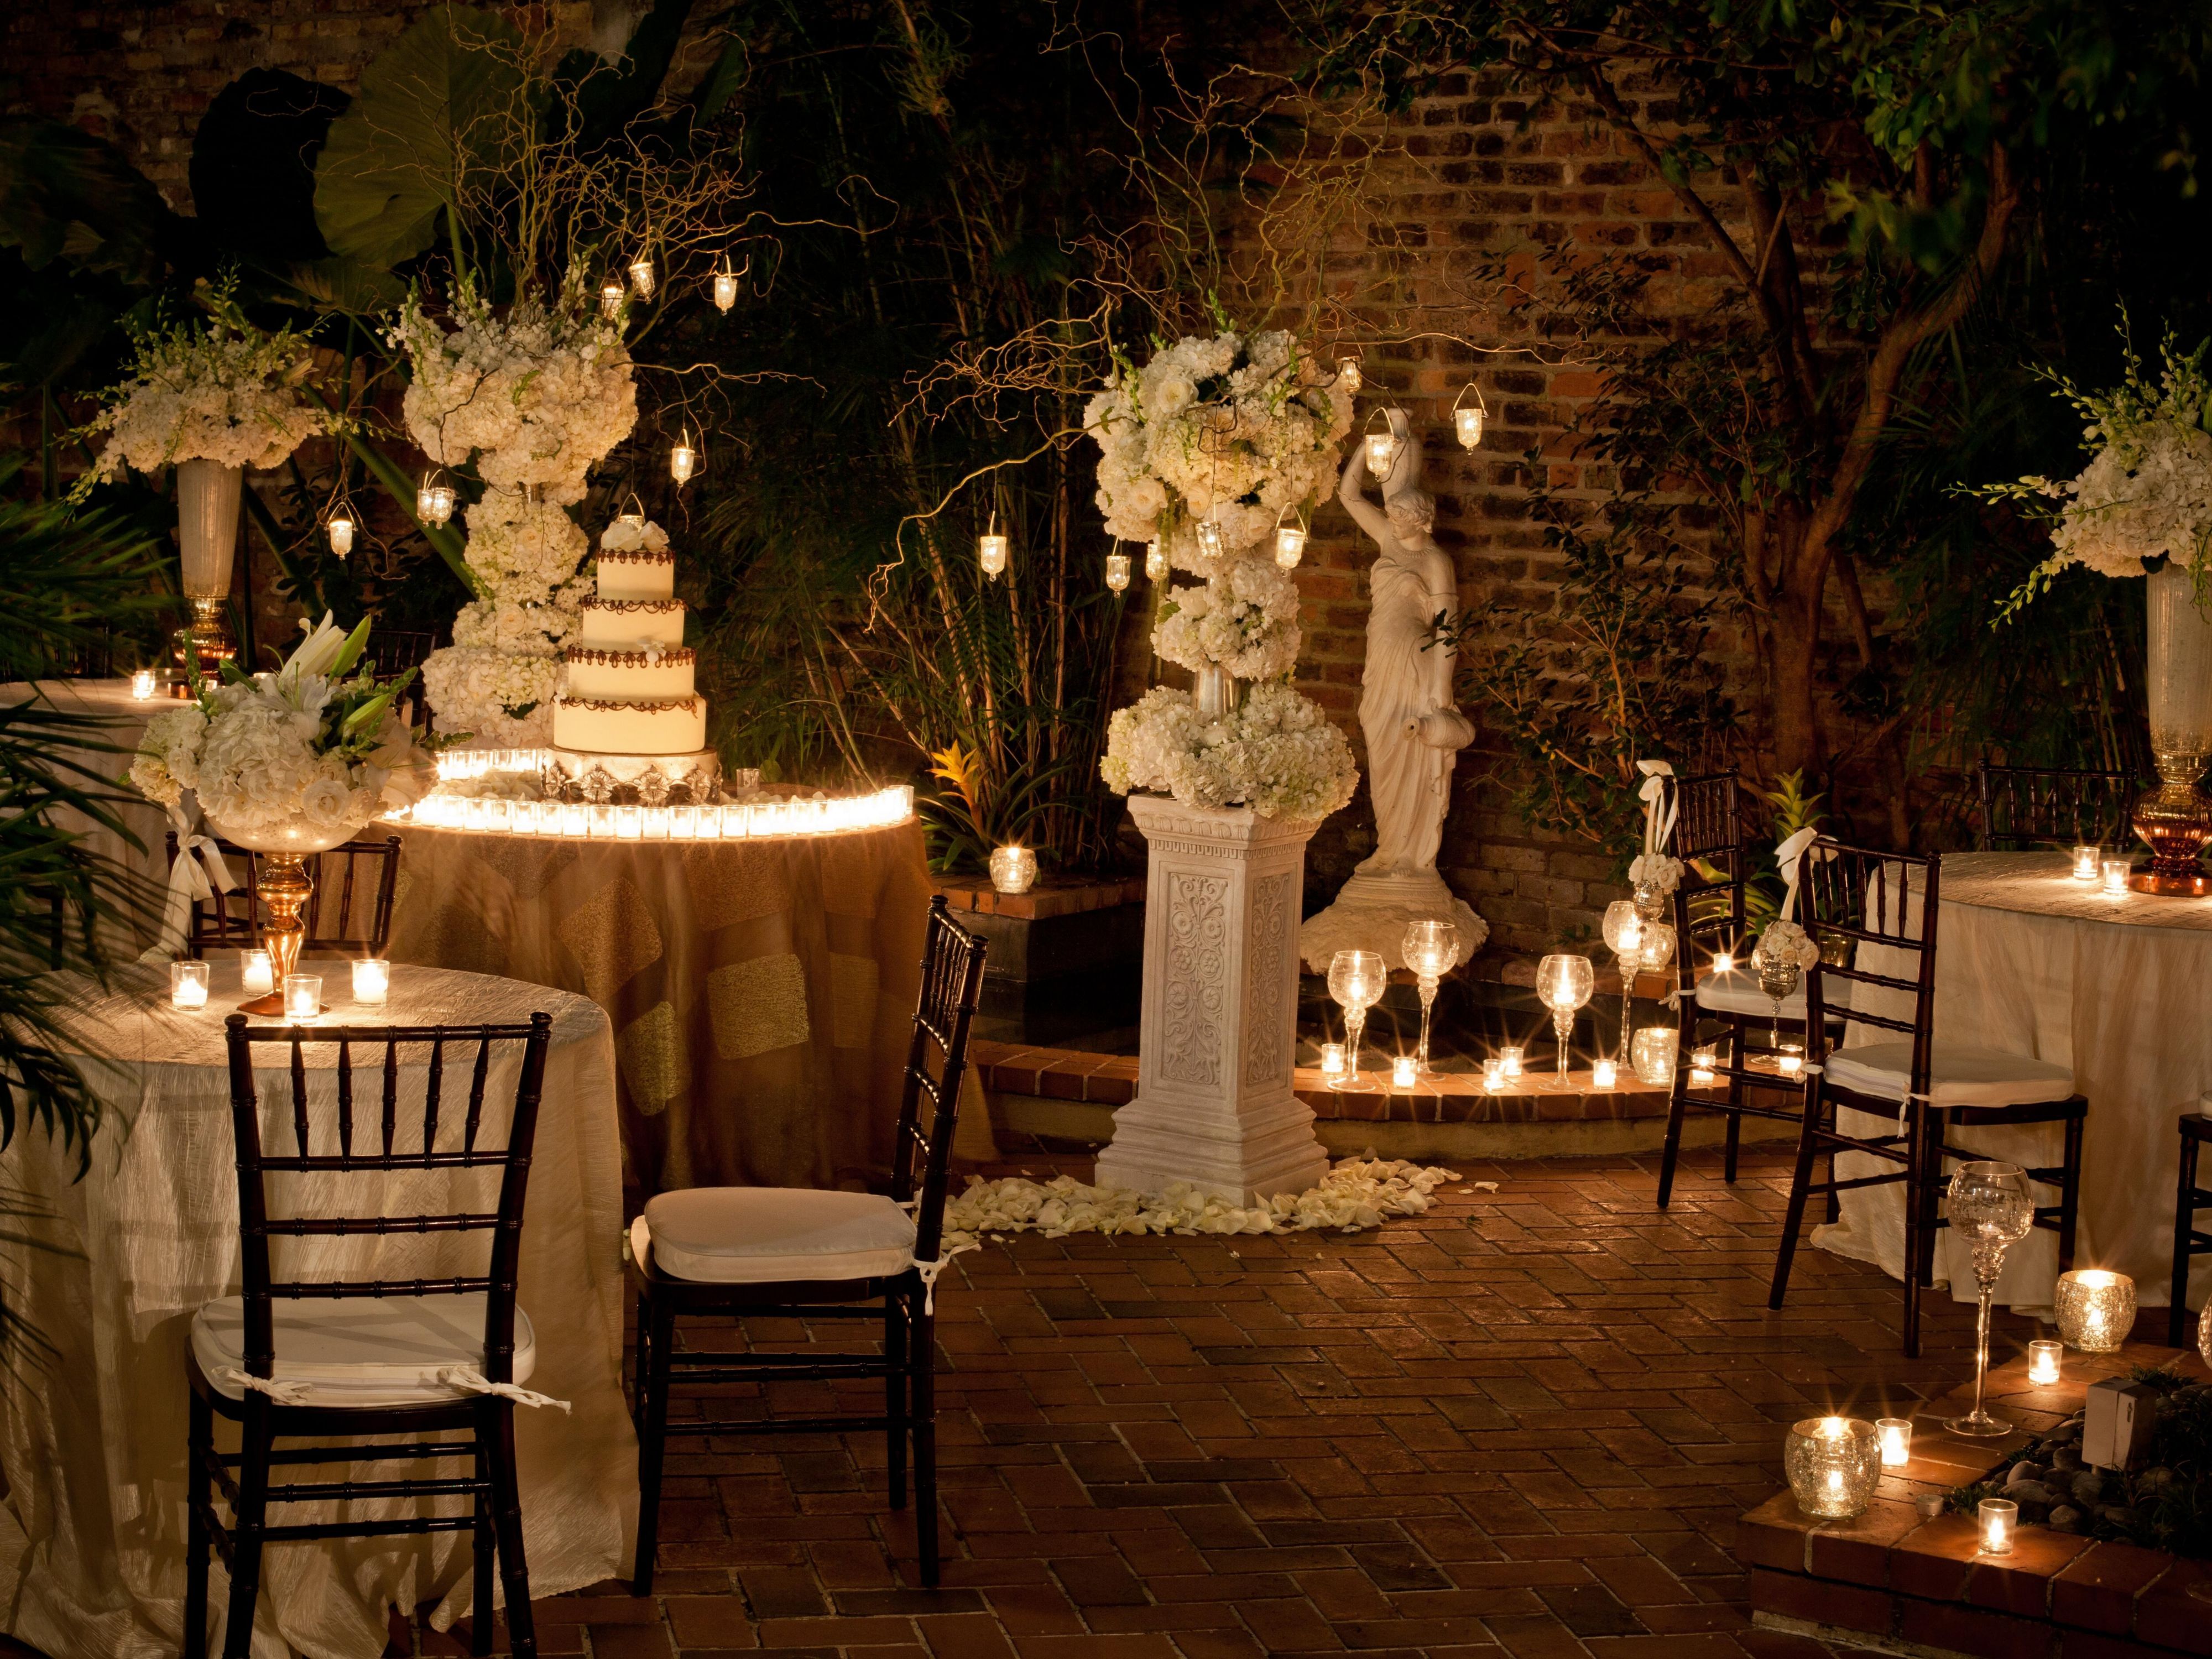 Begin your forever by holding your wedding ceremony and reception in our enchanting, private Garden Courtyard at Chateau LeMoyne, located in the historic French Quarter of New Orleans. Joy and celebration permeate every corner of our colorful city, and we specialize in capturing this spirit for your special day. 